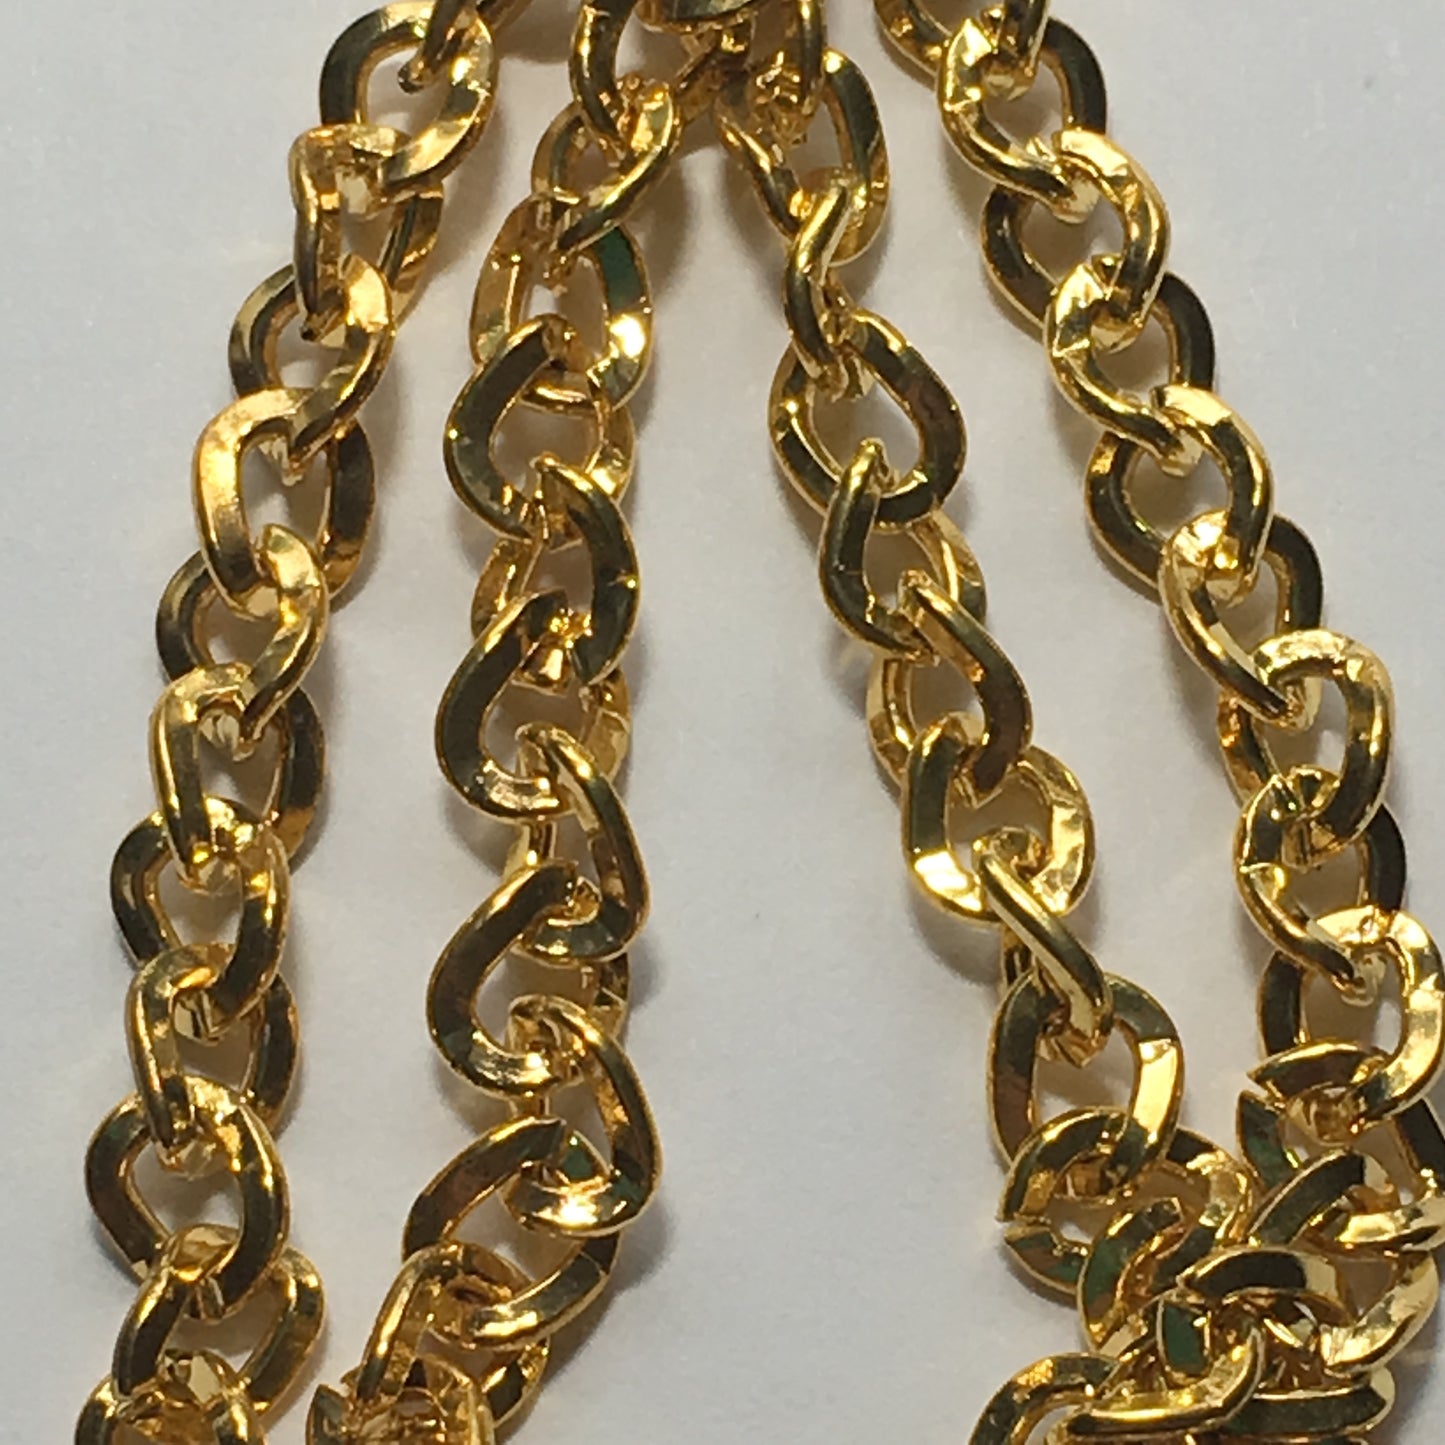 Bead Gallery Gold Plated Chain, 5 x 6 Links - 48 Inches